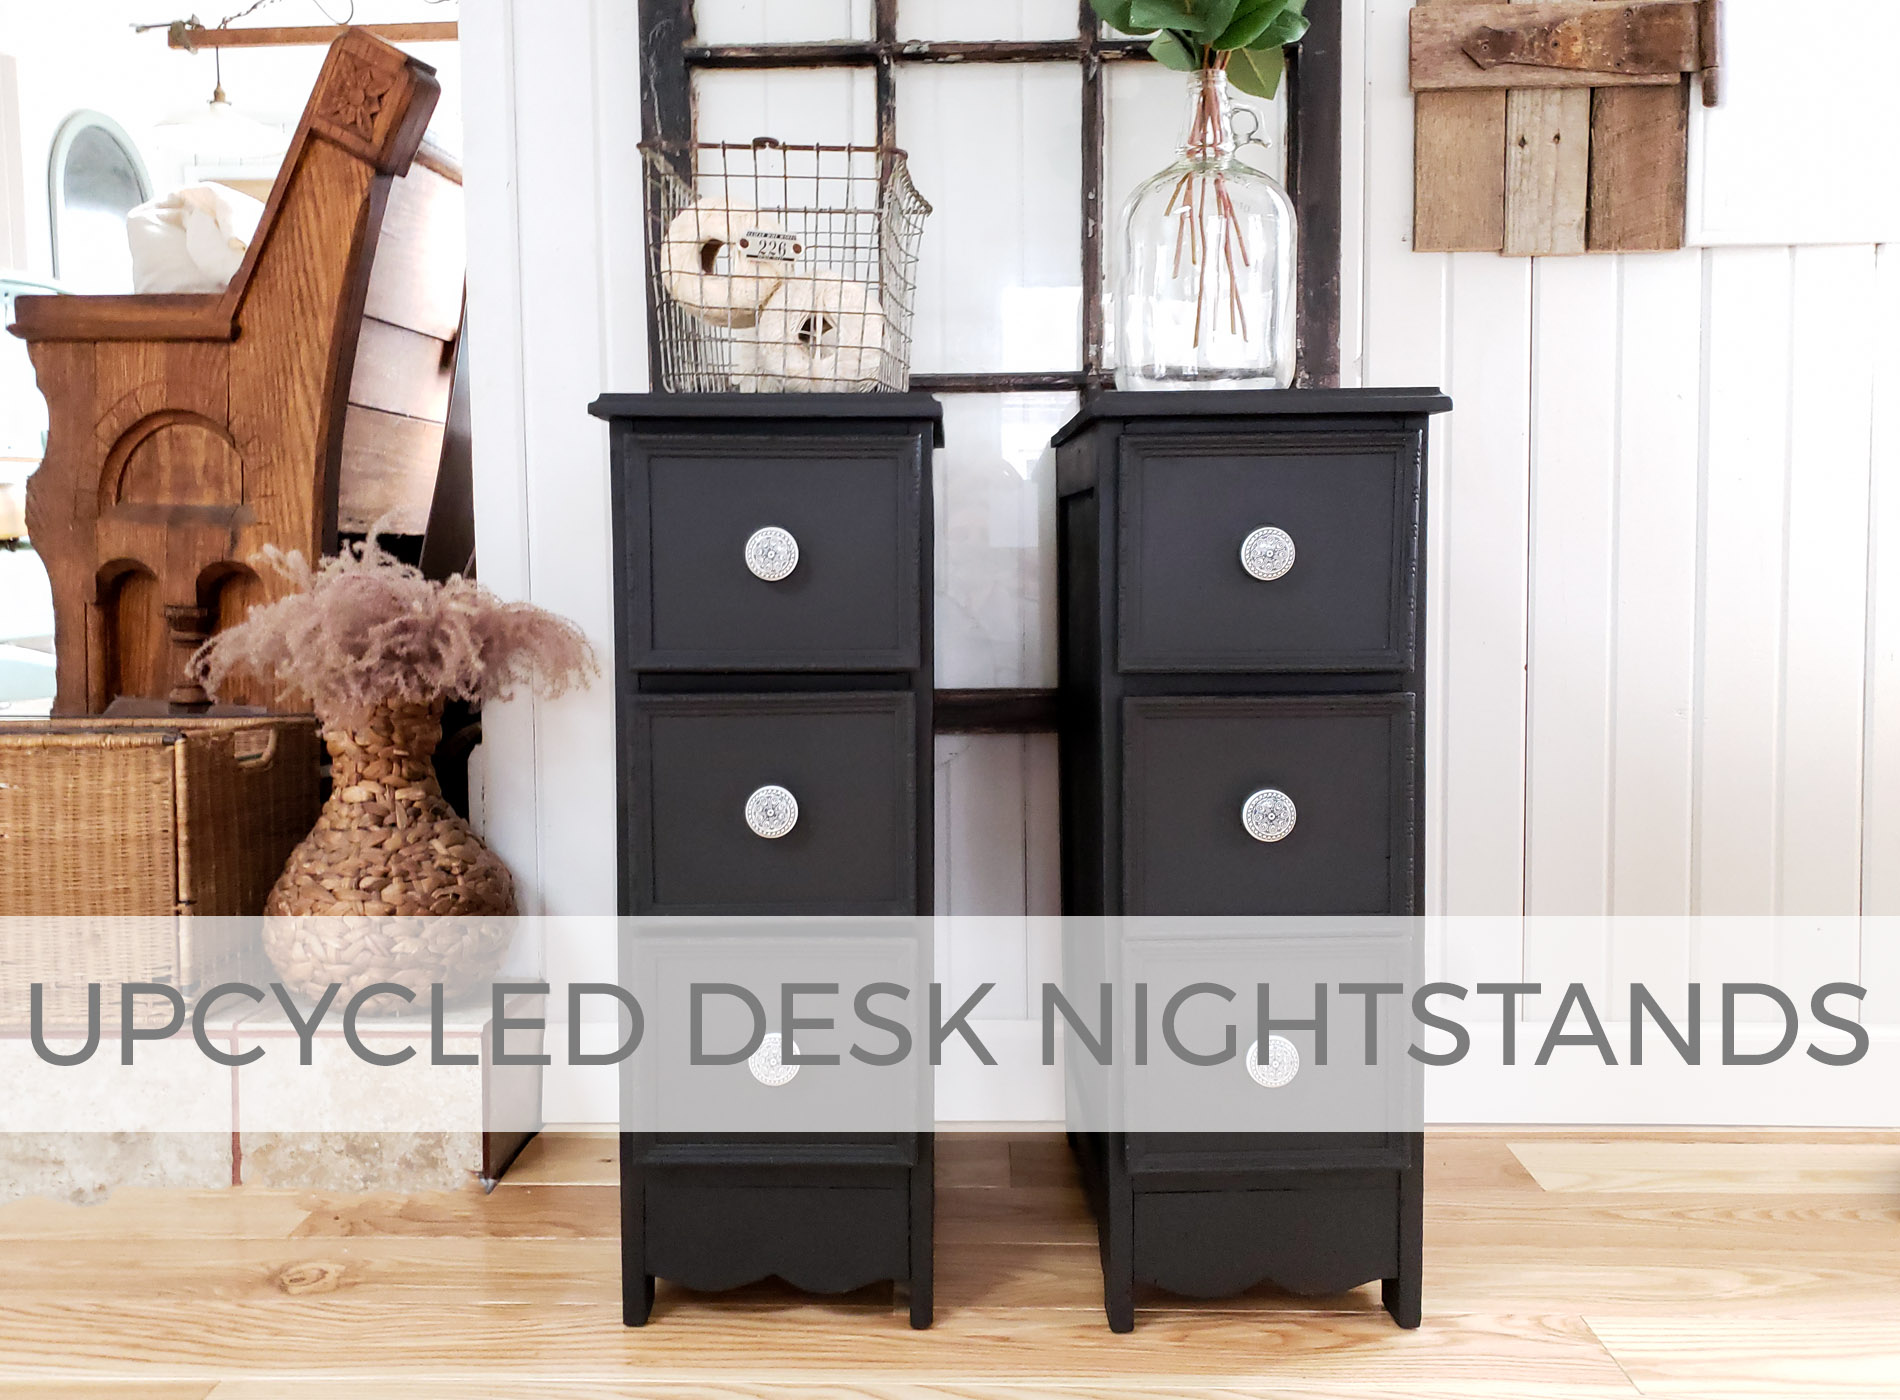 Upcycled Desks into Nightstands by Larissa of Prodigal Pieces | prodigalpieces.com